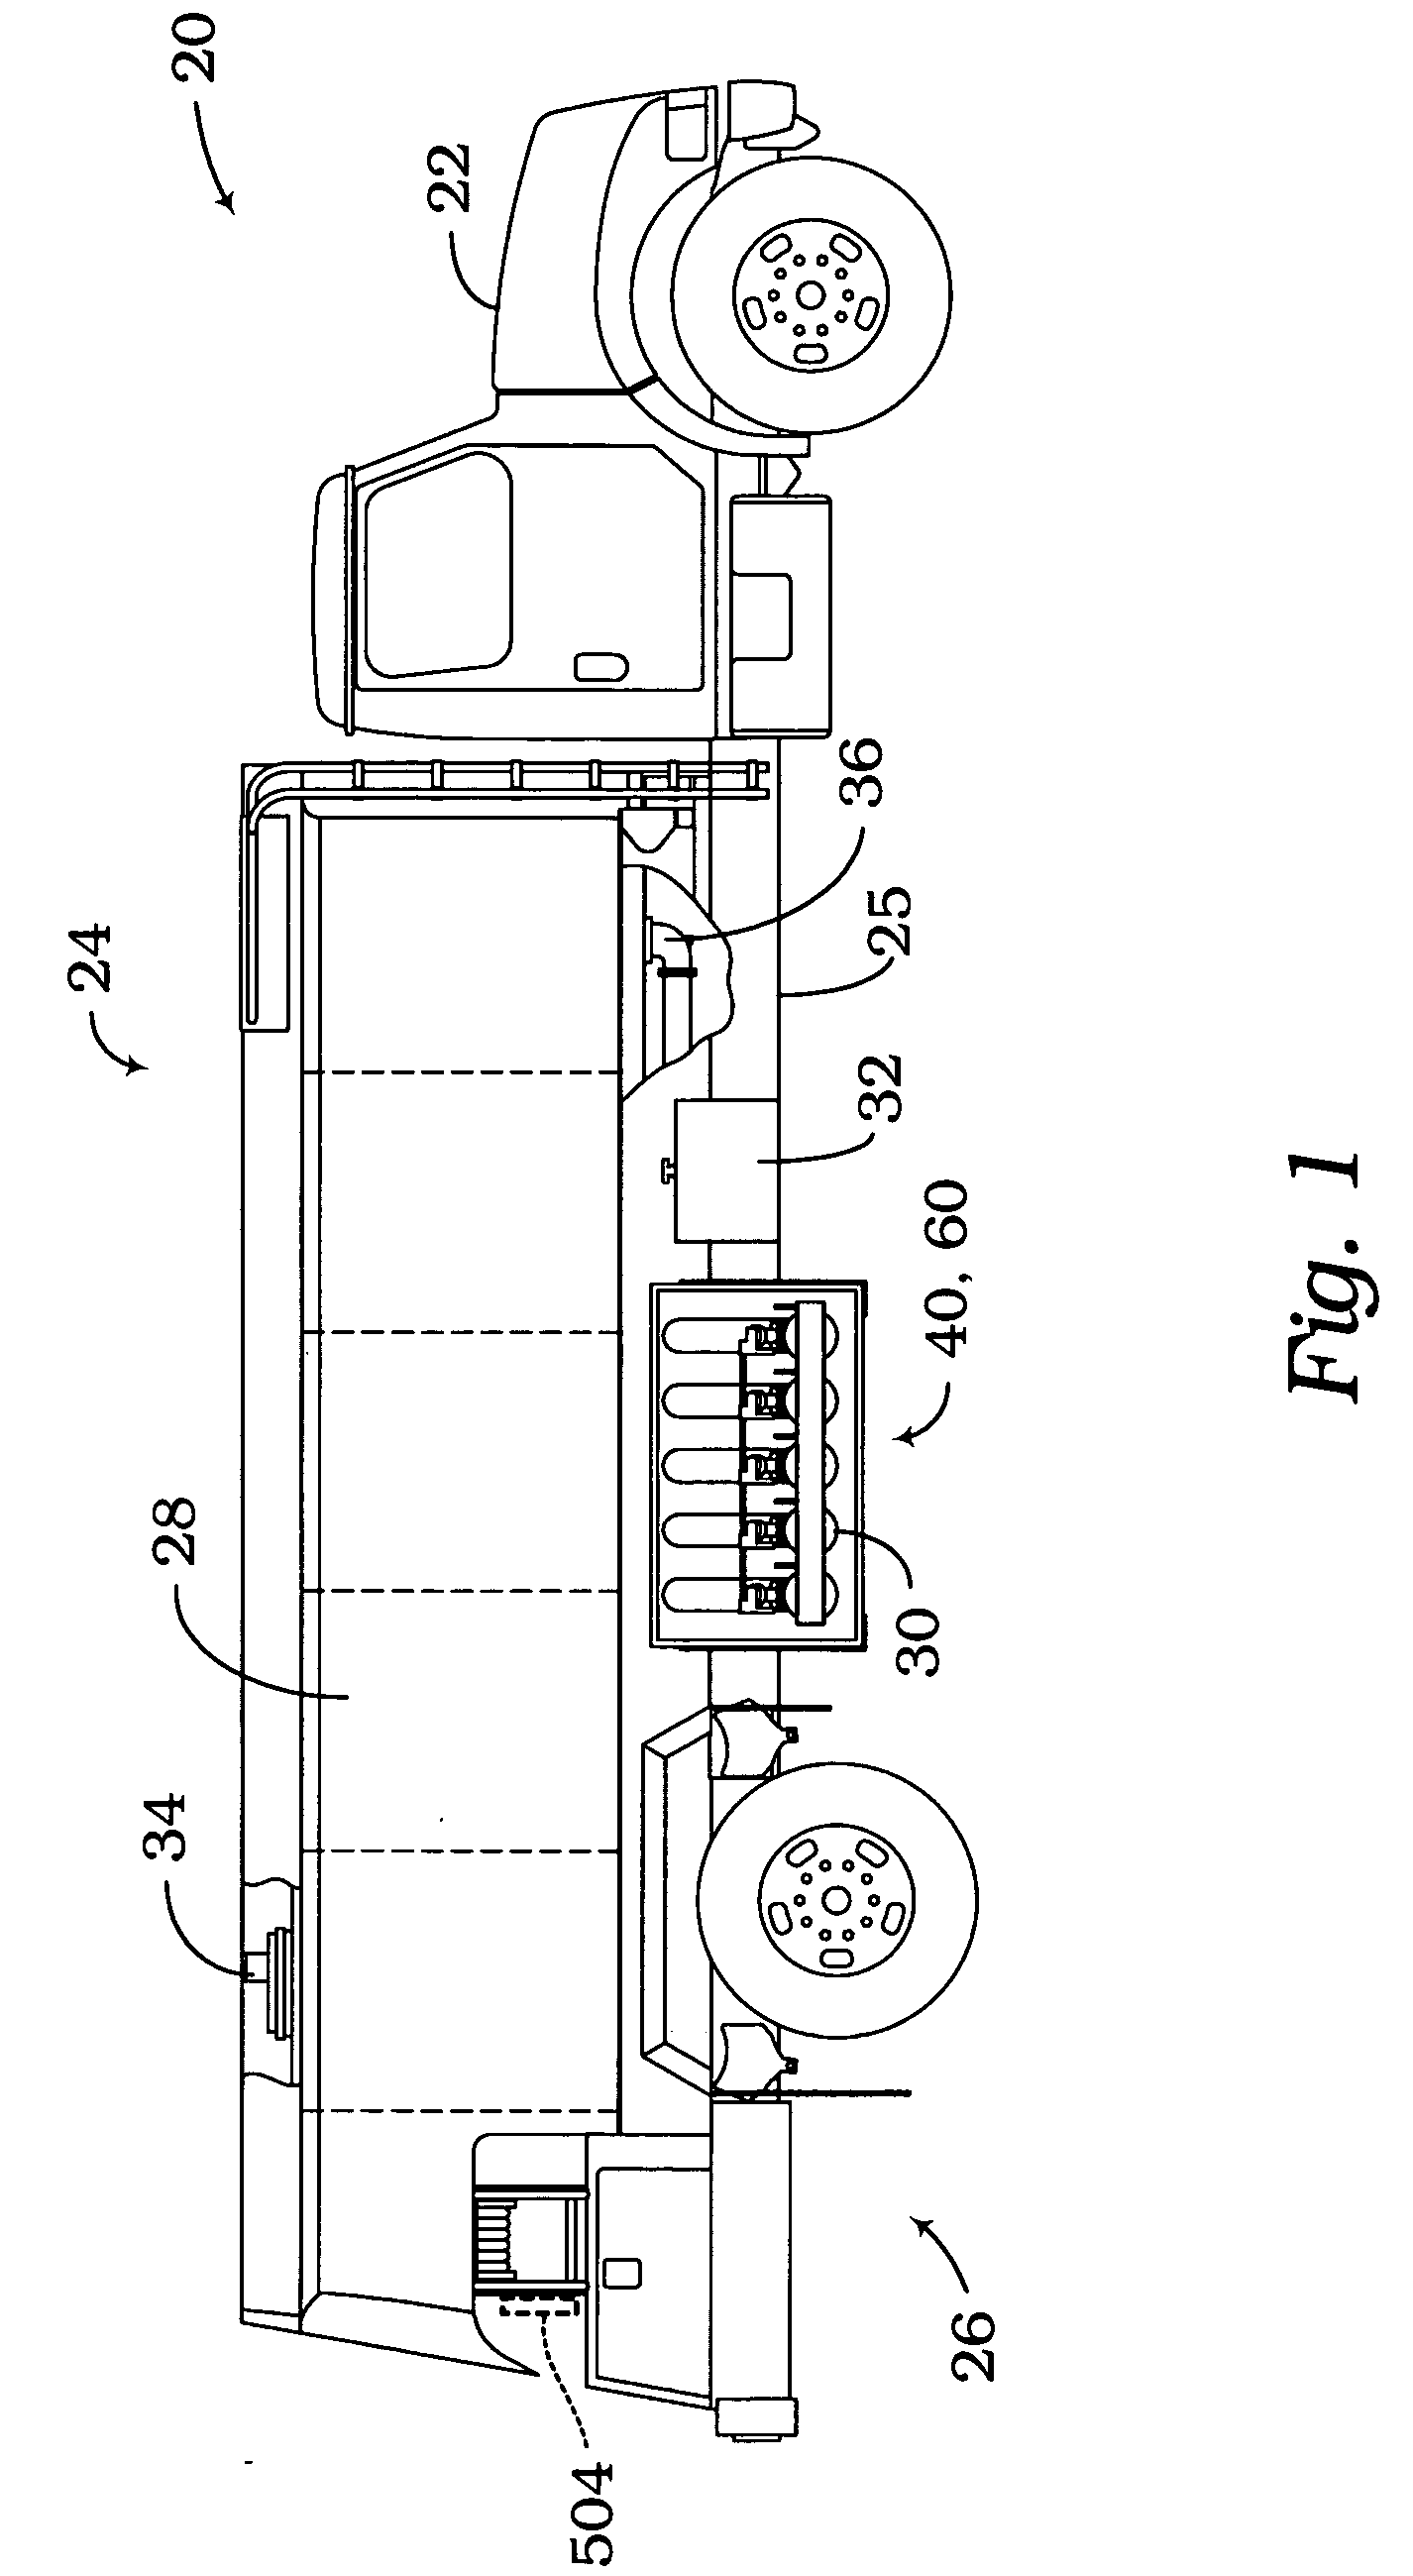 Modular multi-port manifold and fuel delivery system